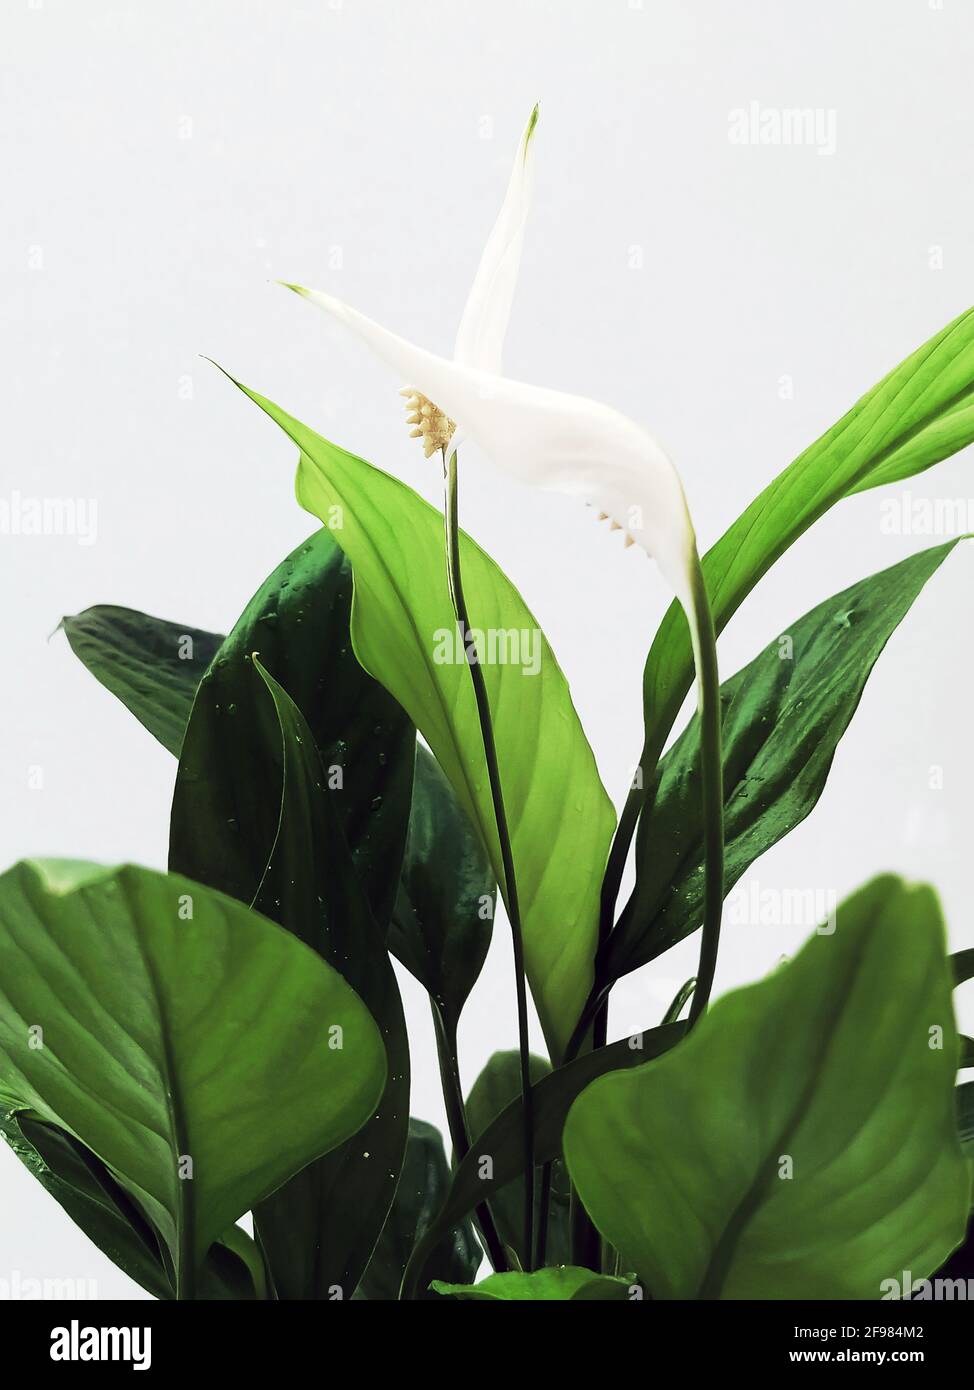 two spathiphyllum flowers with green leaves on a light background Stock Photo